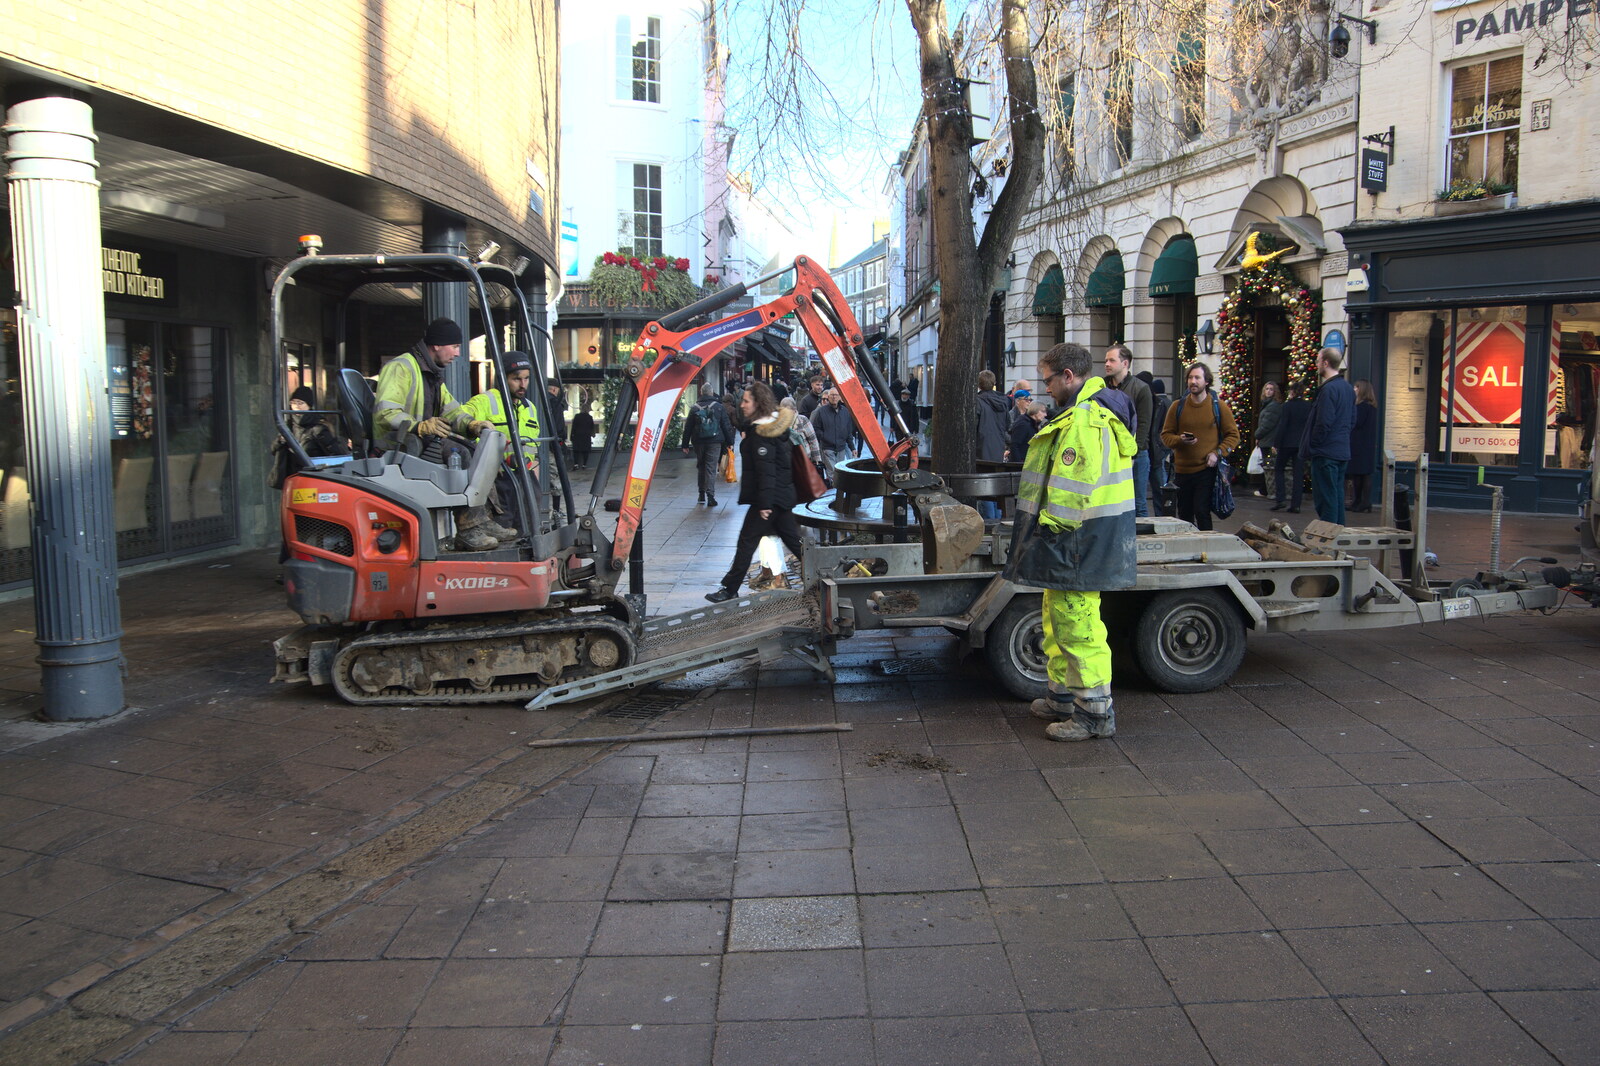 A digger hauls itself up after shedding a track from Christmas Shopping in Norwich, Norfolk - 21st December 2022